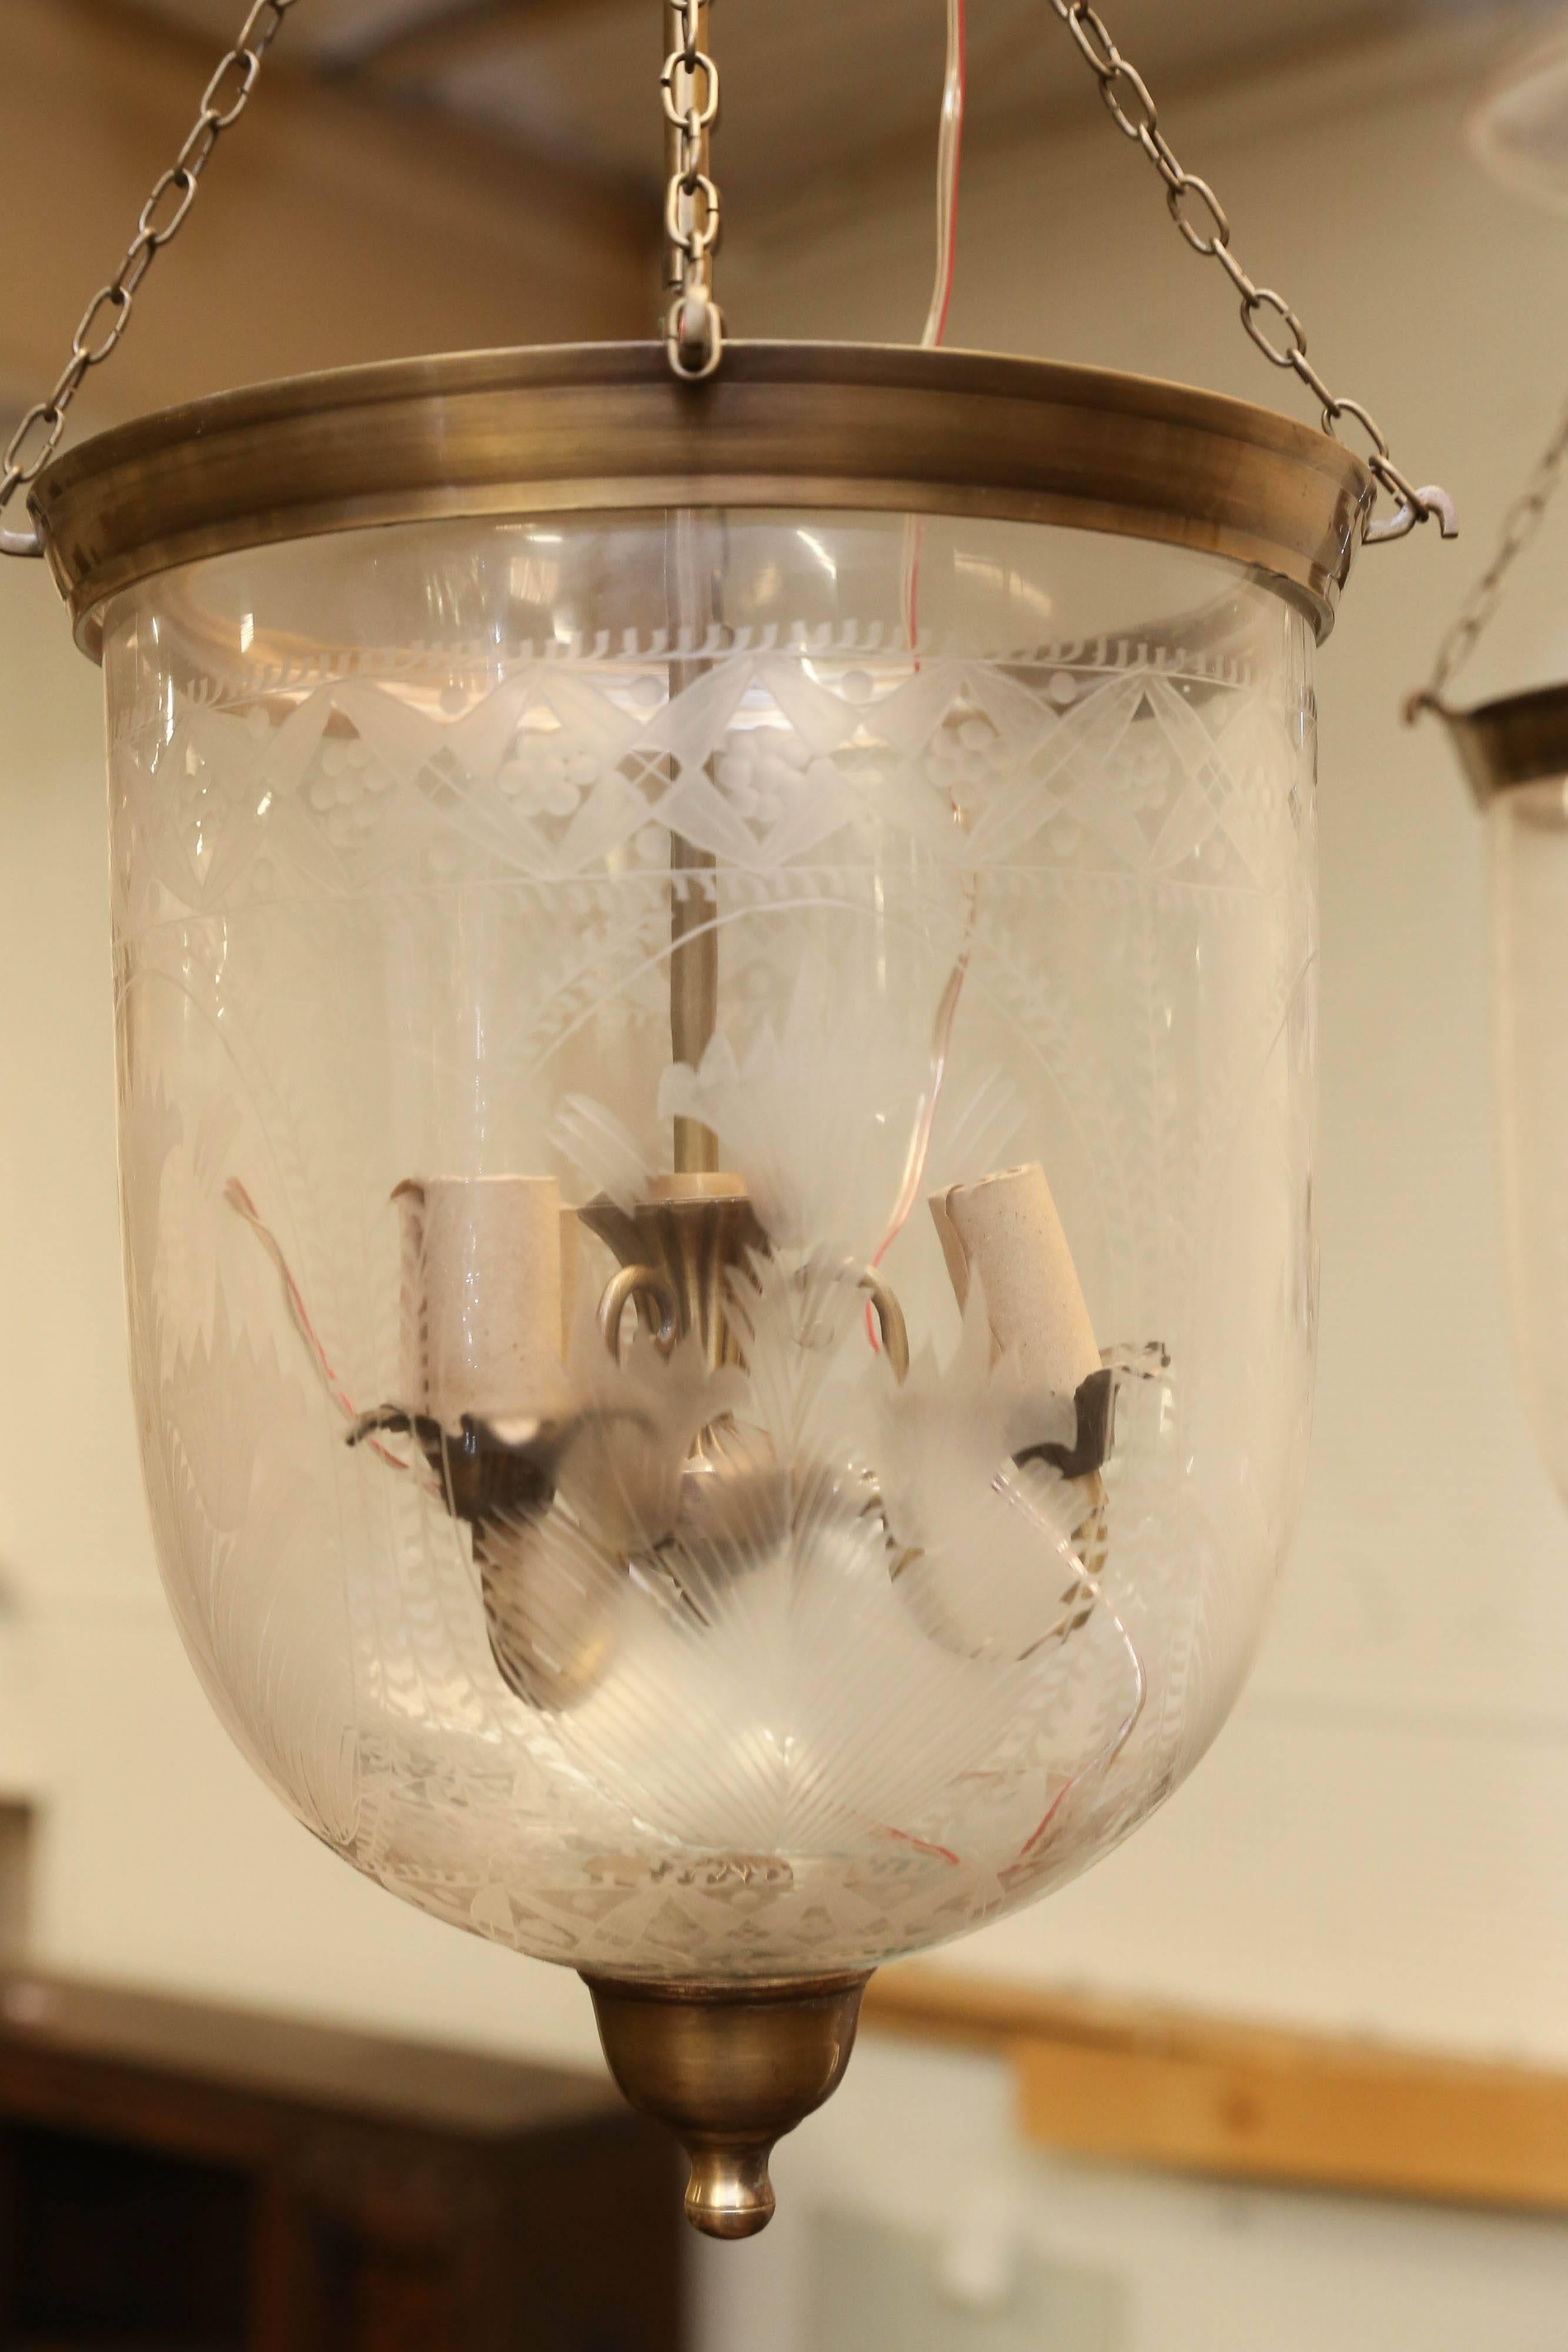 This is a complete hand etched bell jar lantern with hand cast brass hardware. Originally lantern like this one was used for burning whale oil in Europe. Since whale oil emitted thick smoke, glass deflector was added to it. The jar is hand etched in